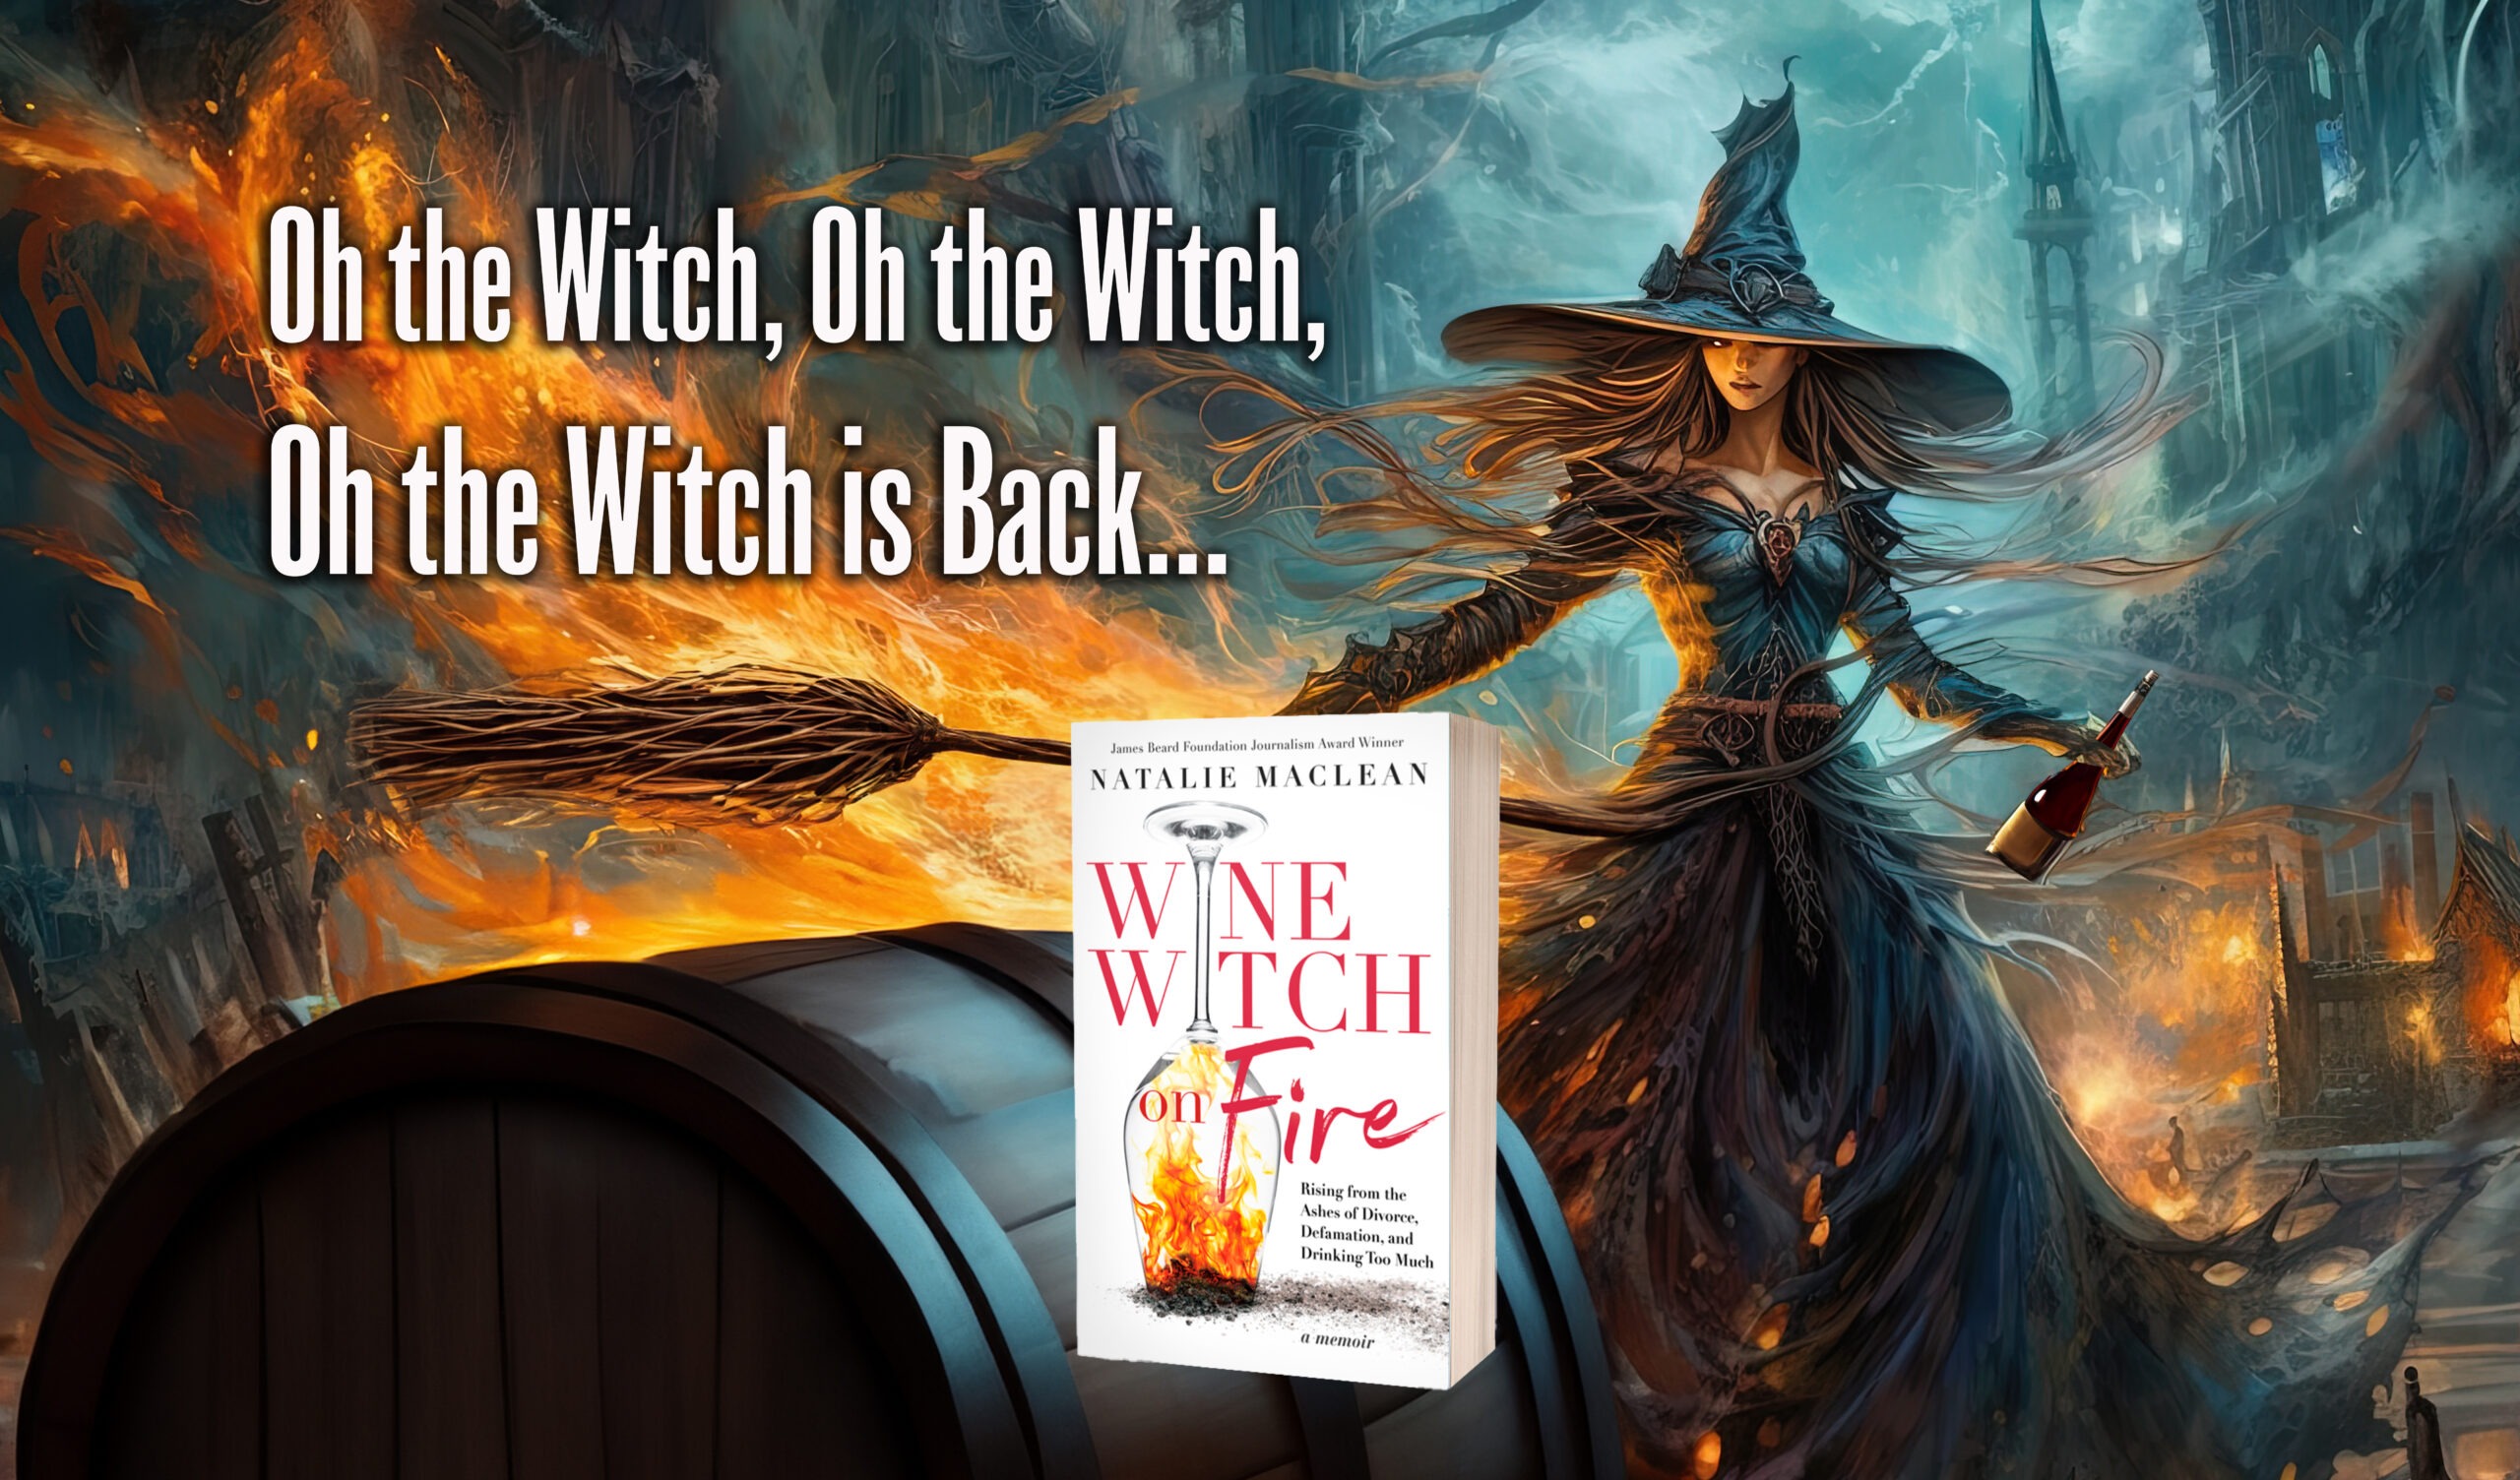 Episode #769 – REIGNITED!  Natalie MacLean’s “Wine Witch on Fire” is Most Requested Encore!